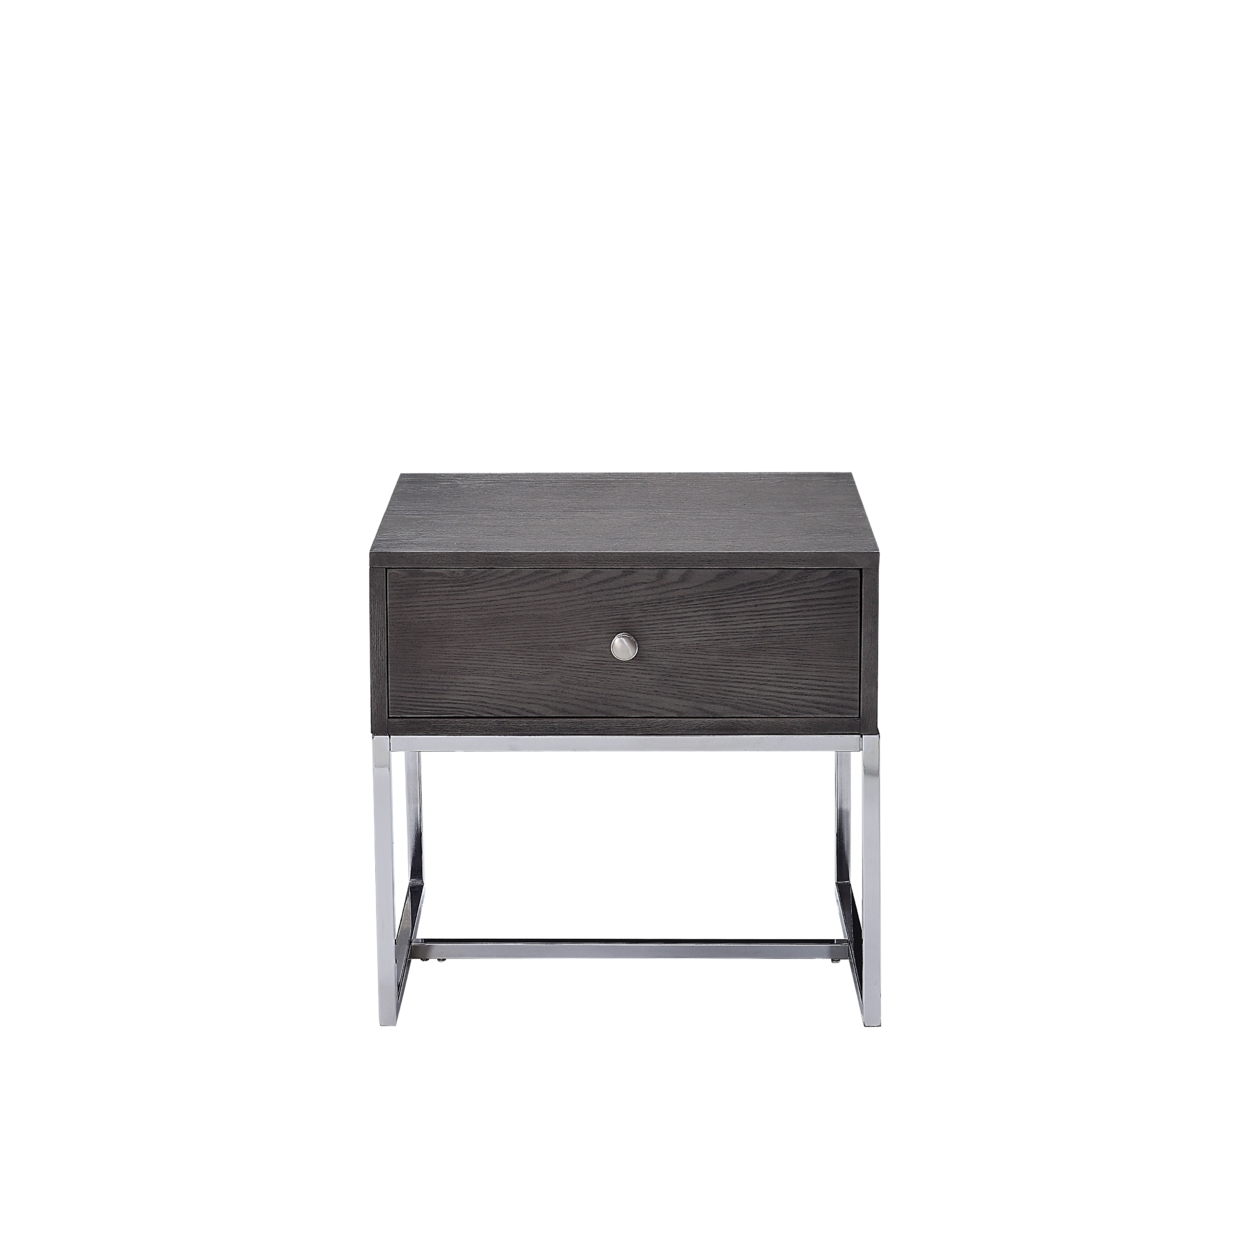 Wooden End Table With Tubular Metal Base And Spacious Drawer, Gray And Silver- Saltoro Sherpi